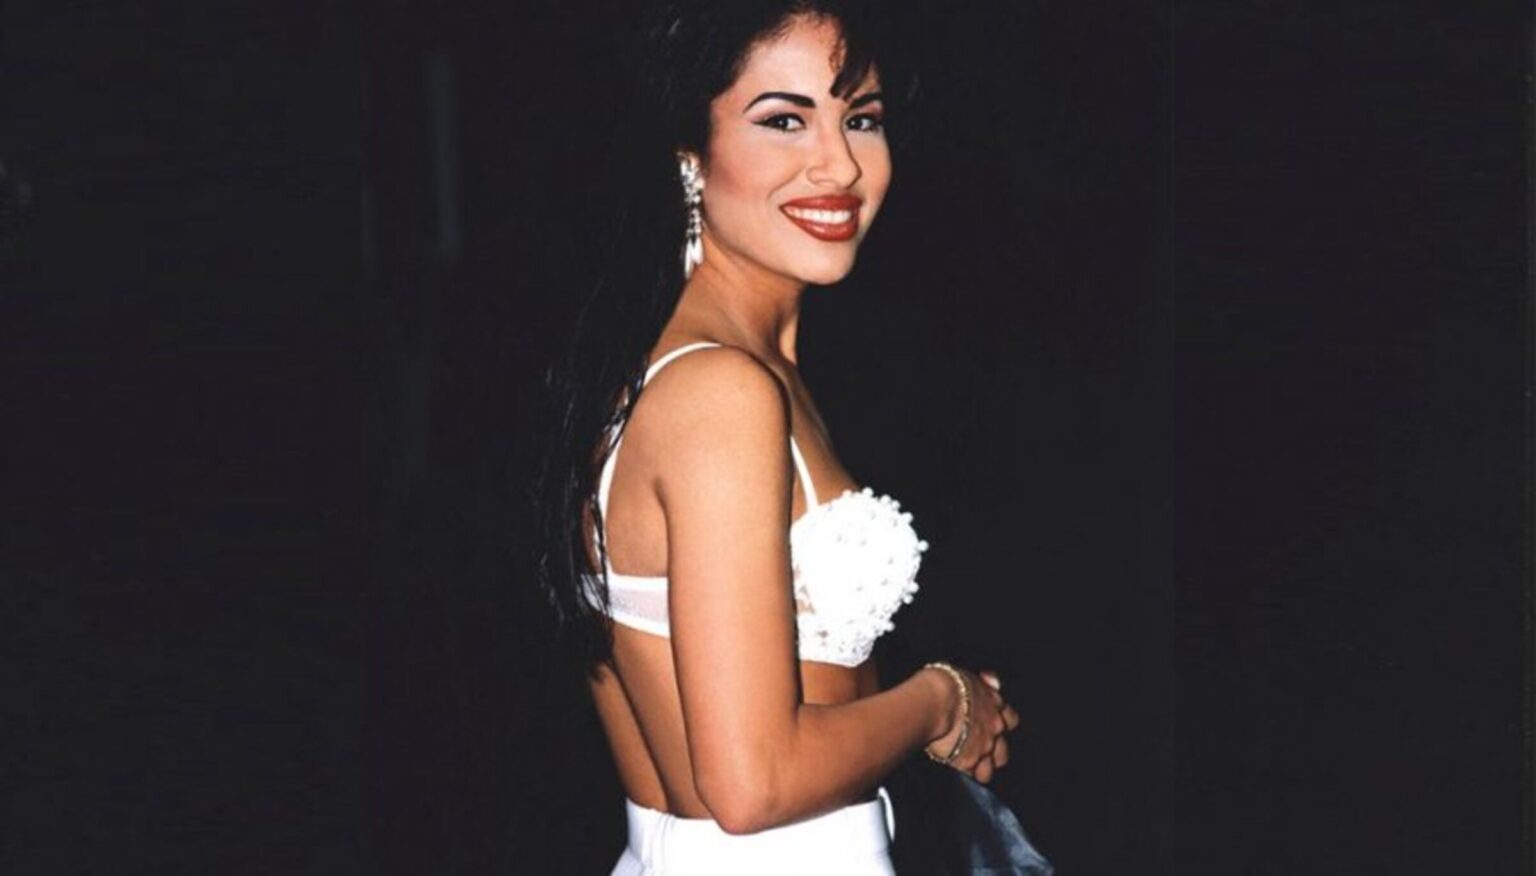 On March 31st, 1995, legendary Tejano pop singer Selena Quintanilla was killed. But there's still more to this case and her killer. See these details!